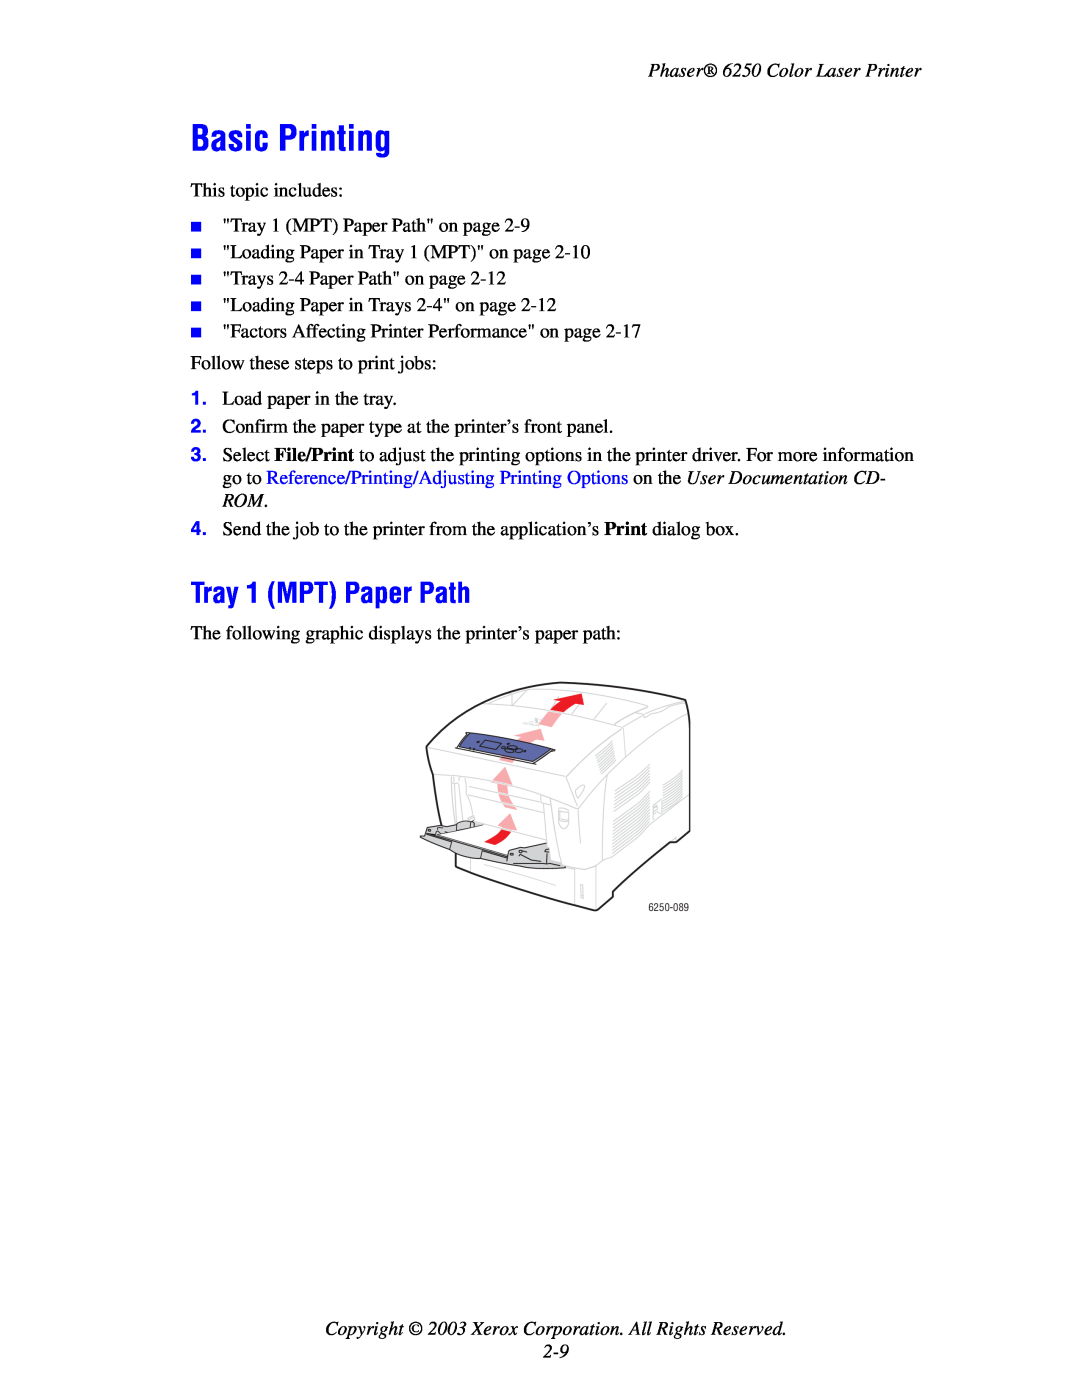 Xerox 6250 manual Basic Printing, Tray 1 MPT Paper Path, Copyright 2003 Xerox Corporation. All Rights Reserved 2-9 